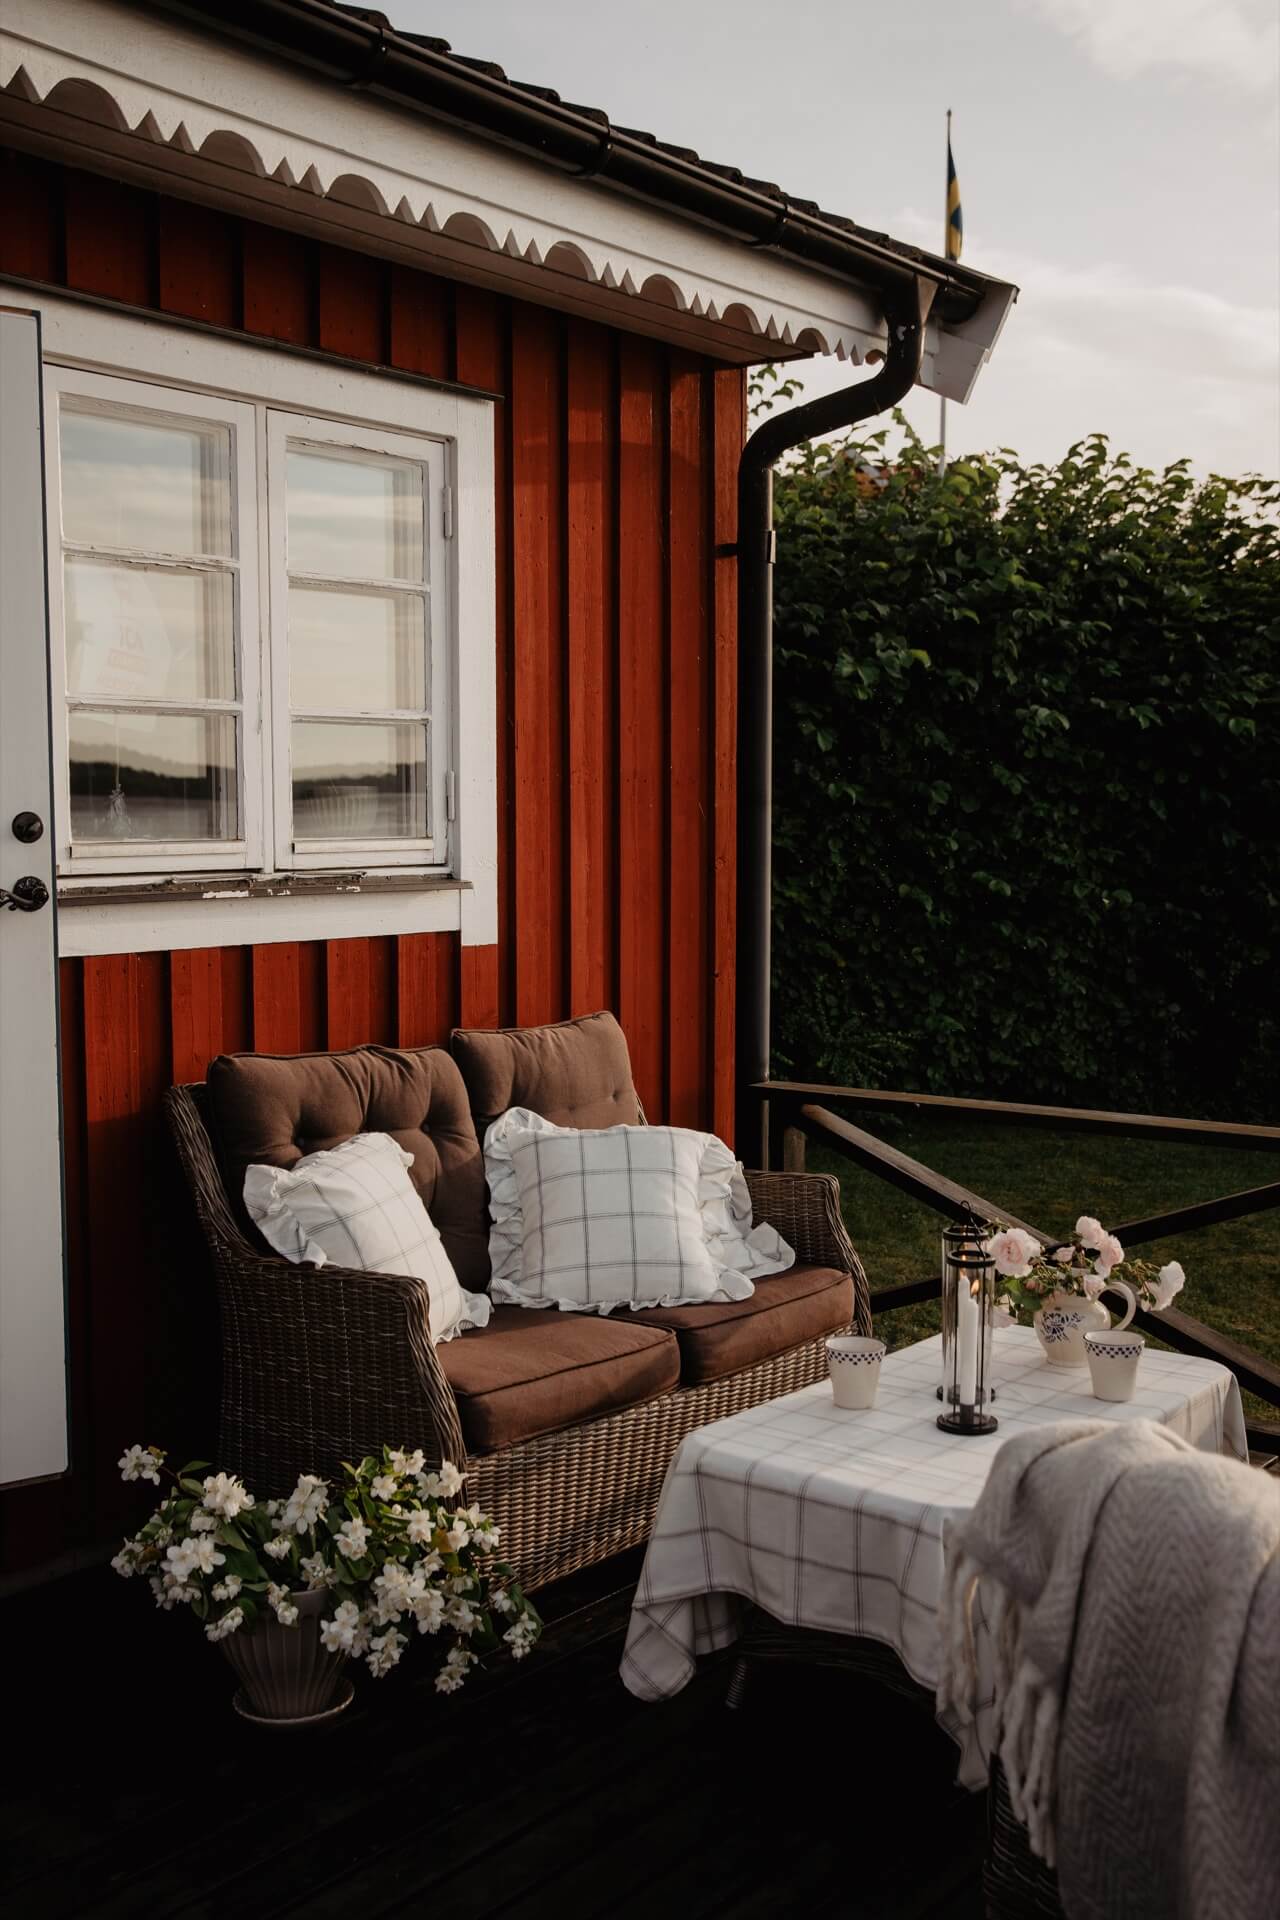 Emelie Sundberg home tour - exterior of Swedish home with cosy seating area.